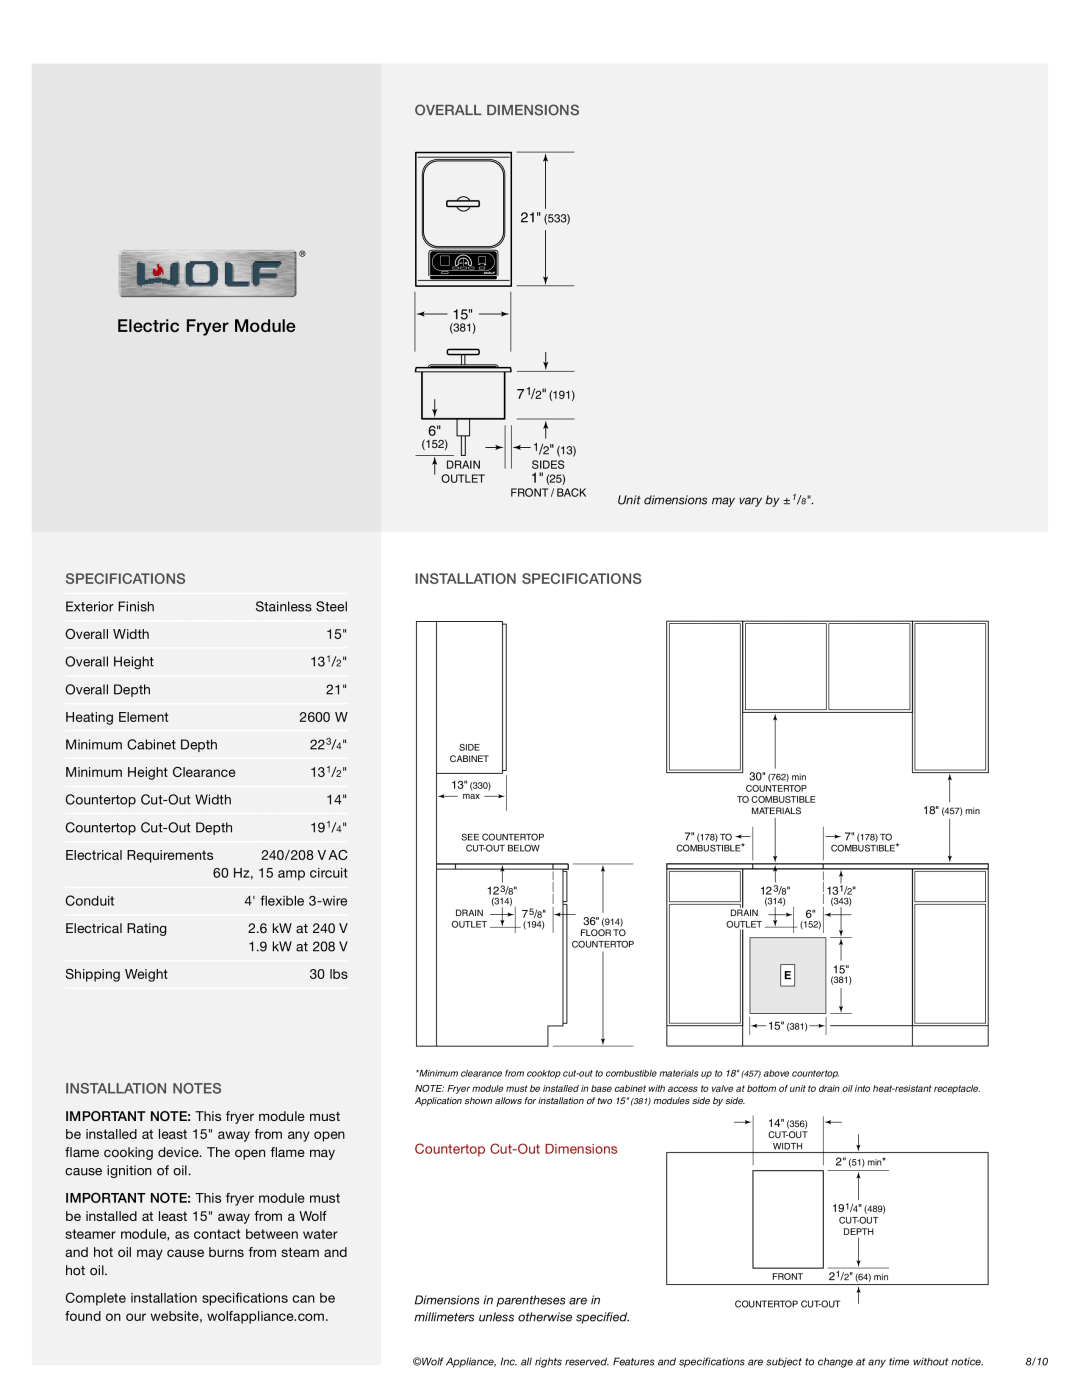 Wolf Appliance Company IF15/S manual Overall Dimensions, Installation Specifications, Installation Notes 